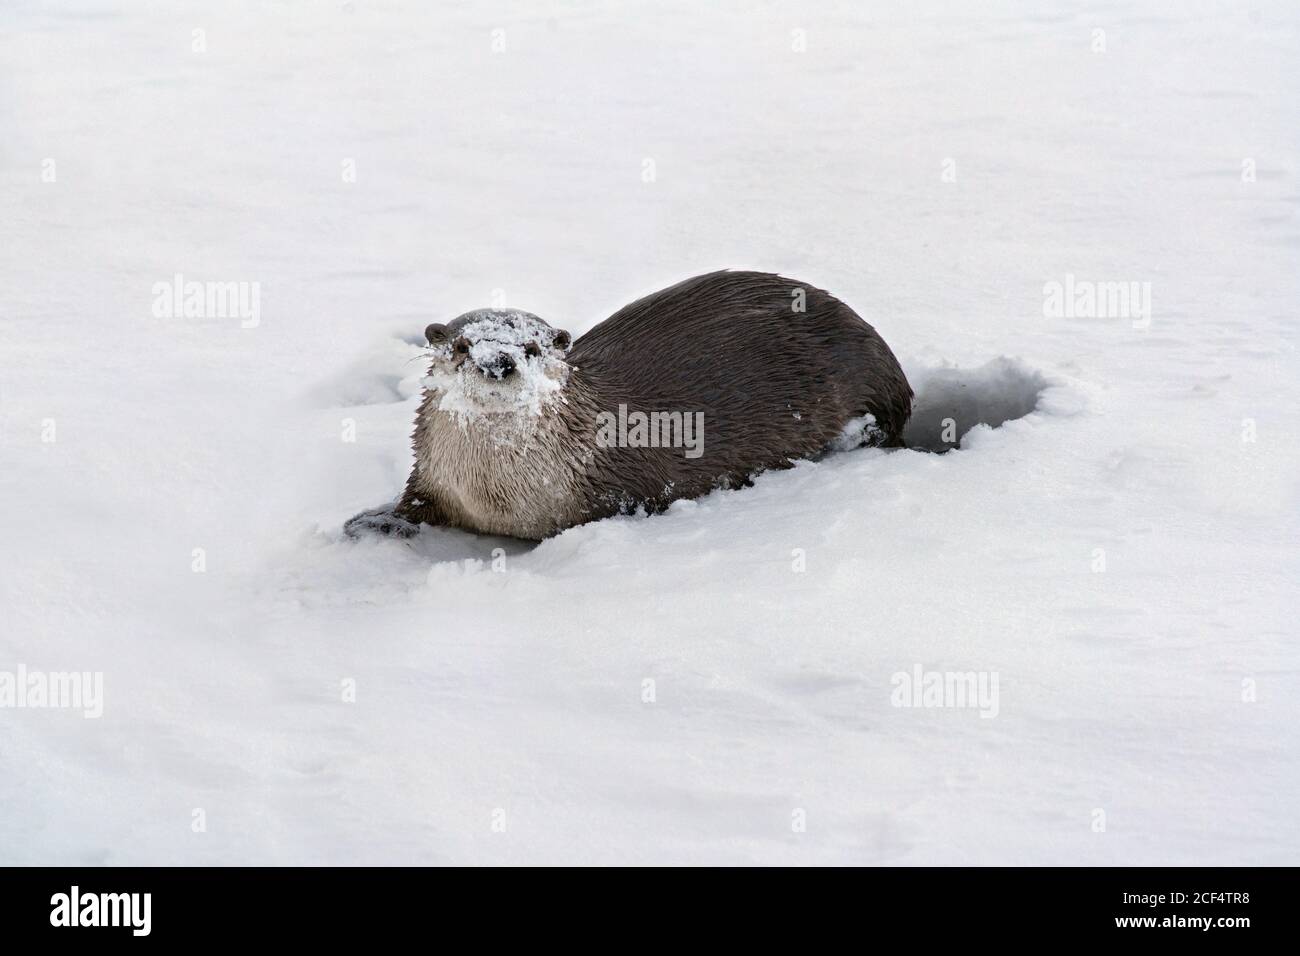 River otter on snow Stock Photo